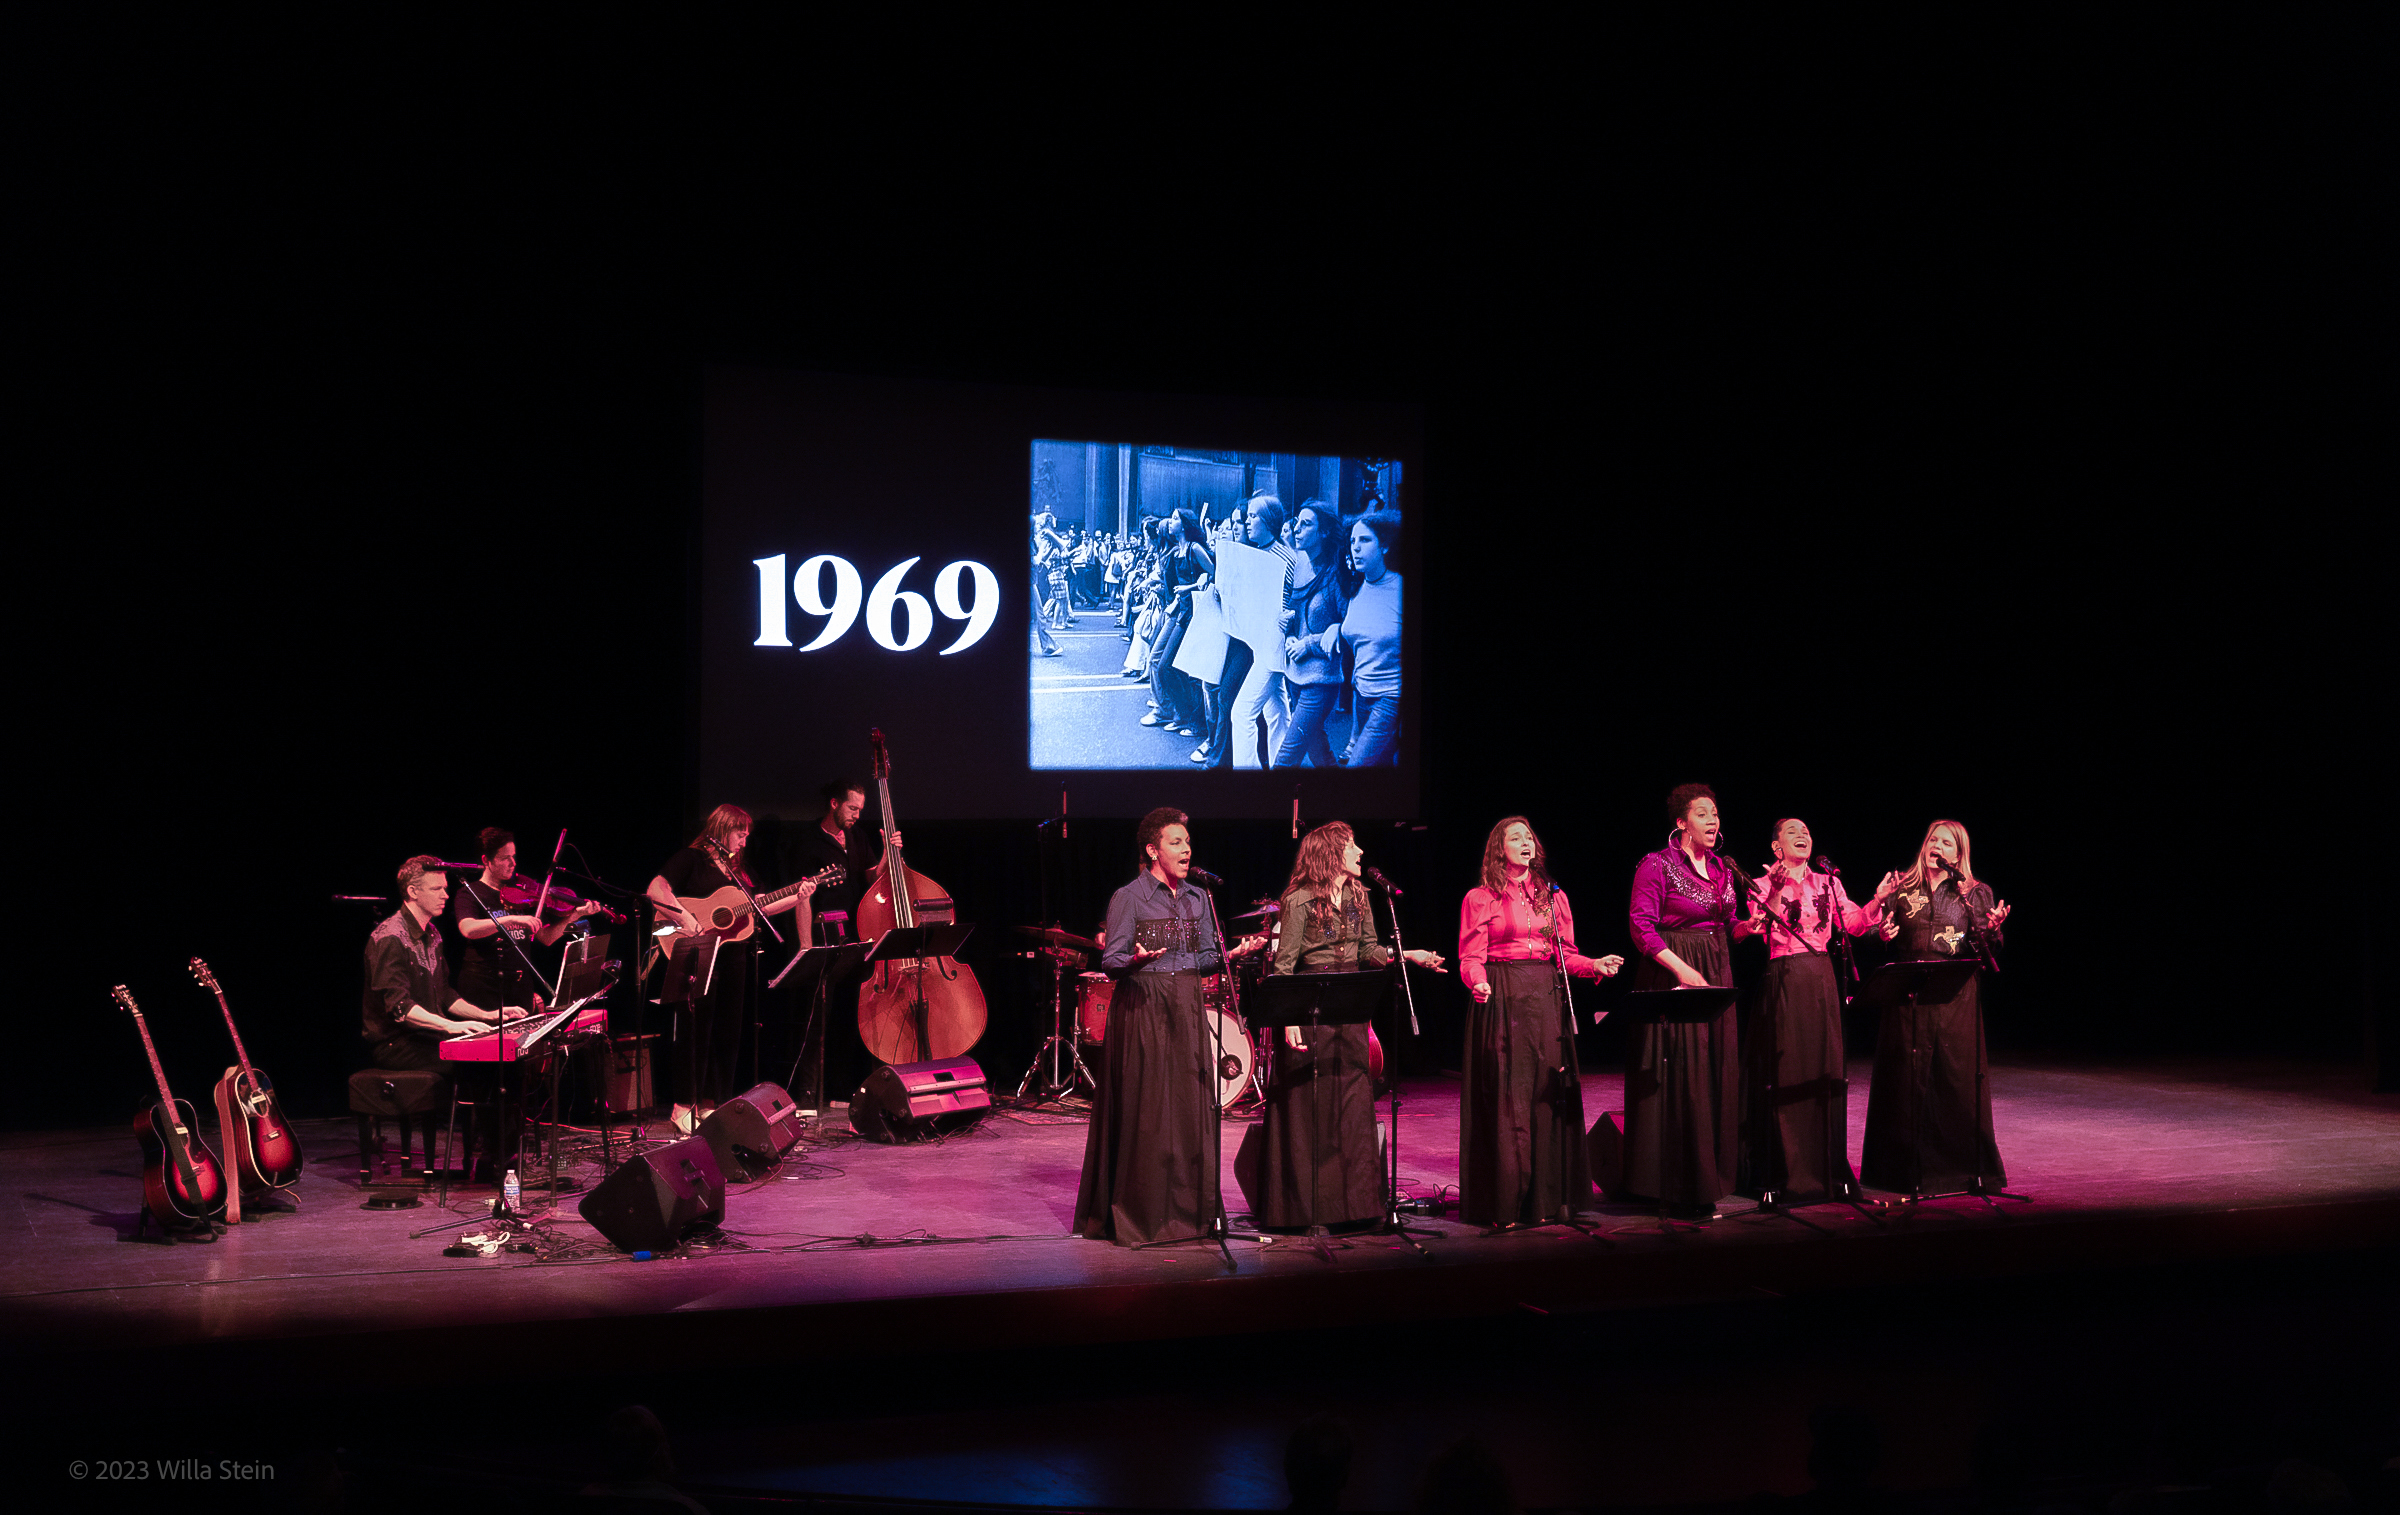 a large group musical performance featuring six female vocalists and band.